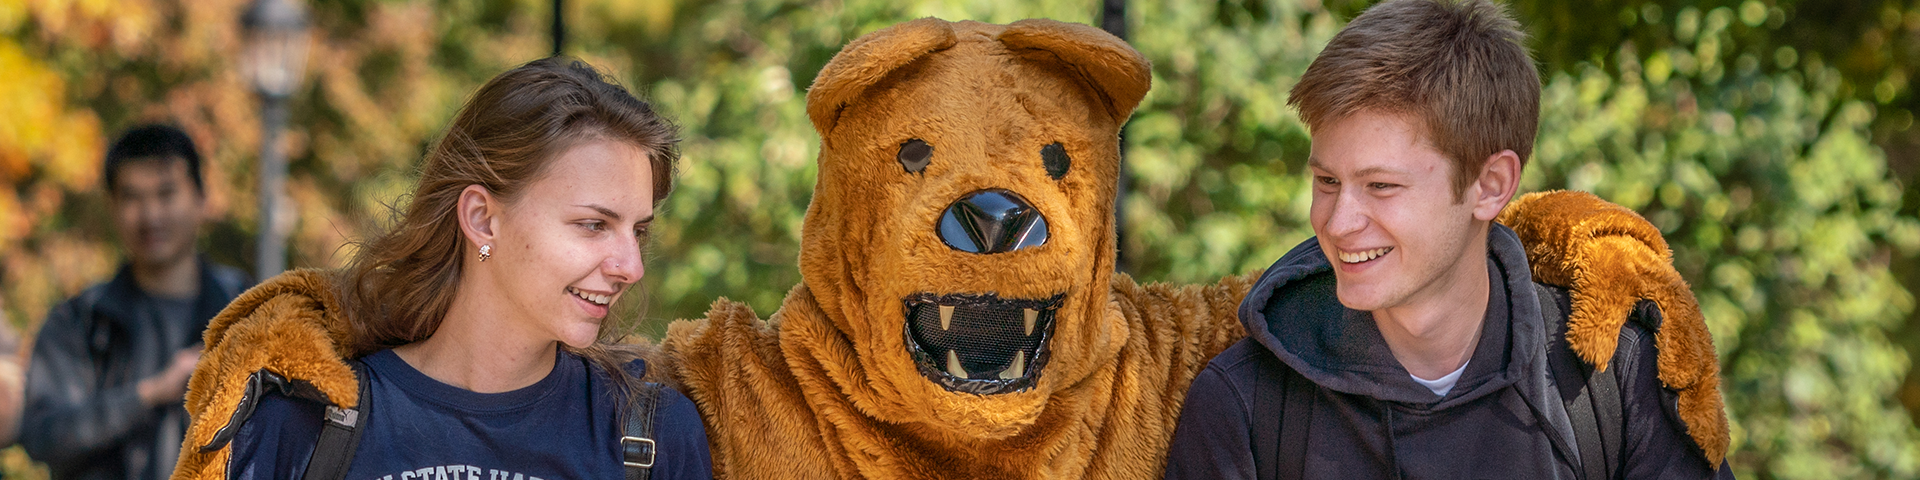 Nittany Lion mascot with arms around male and female student as the three walk together outdoors.